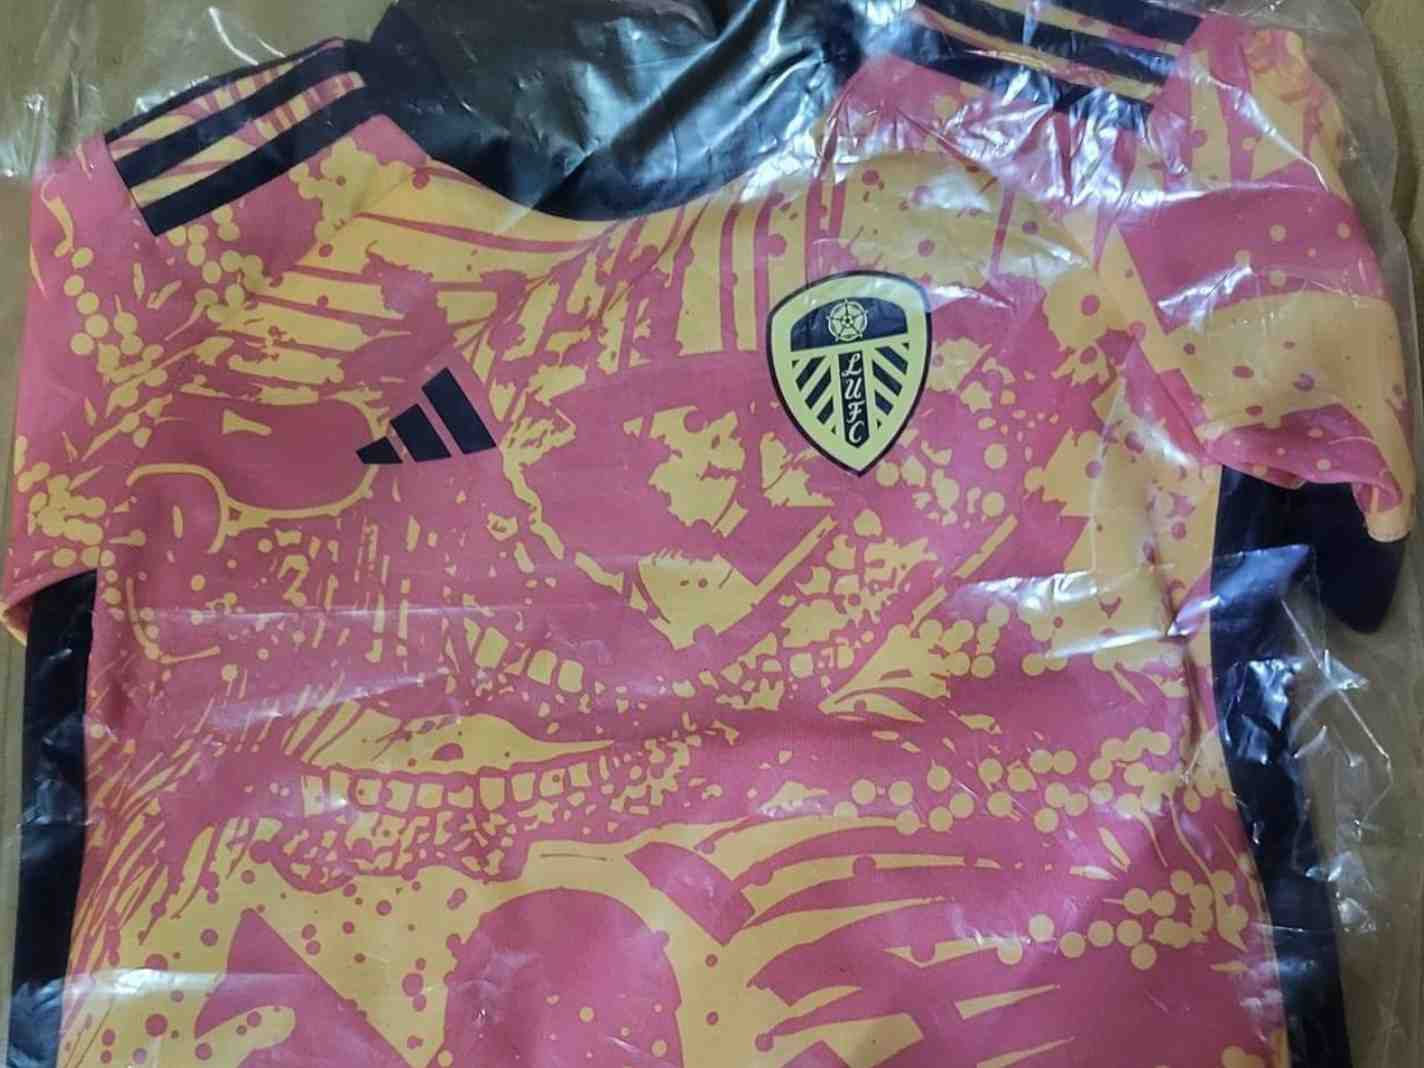 Leaked 23/24 Leeds United Third Kit Catches Flak: ‘Turns Out This is Legit’